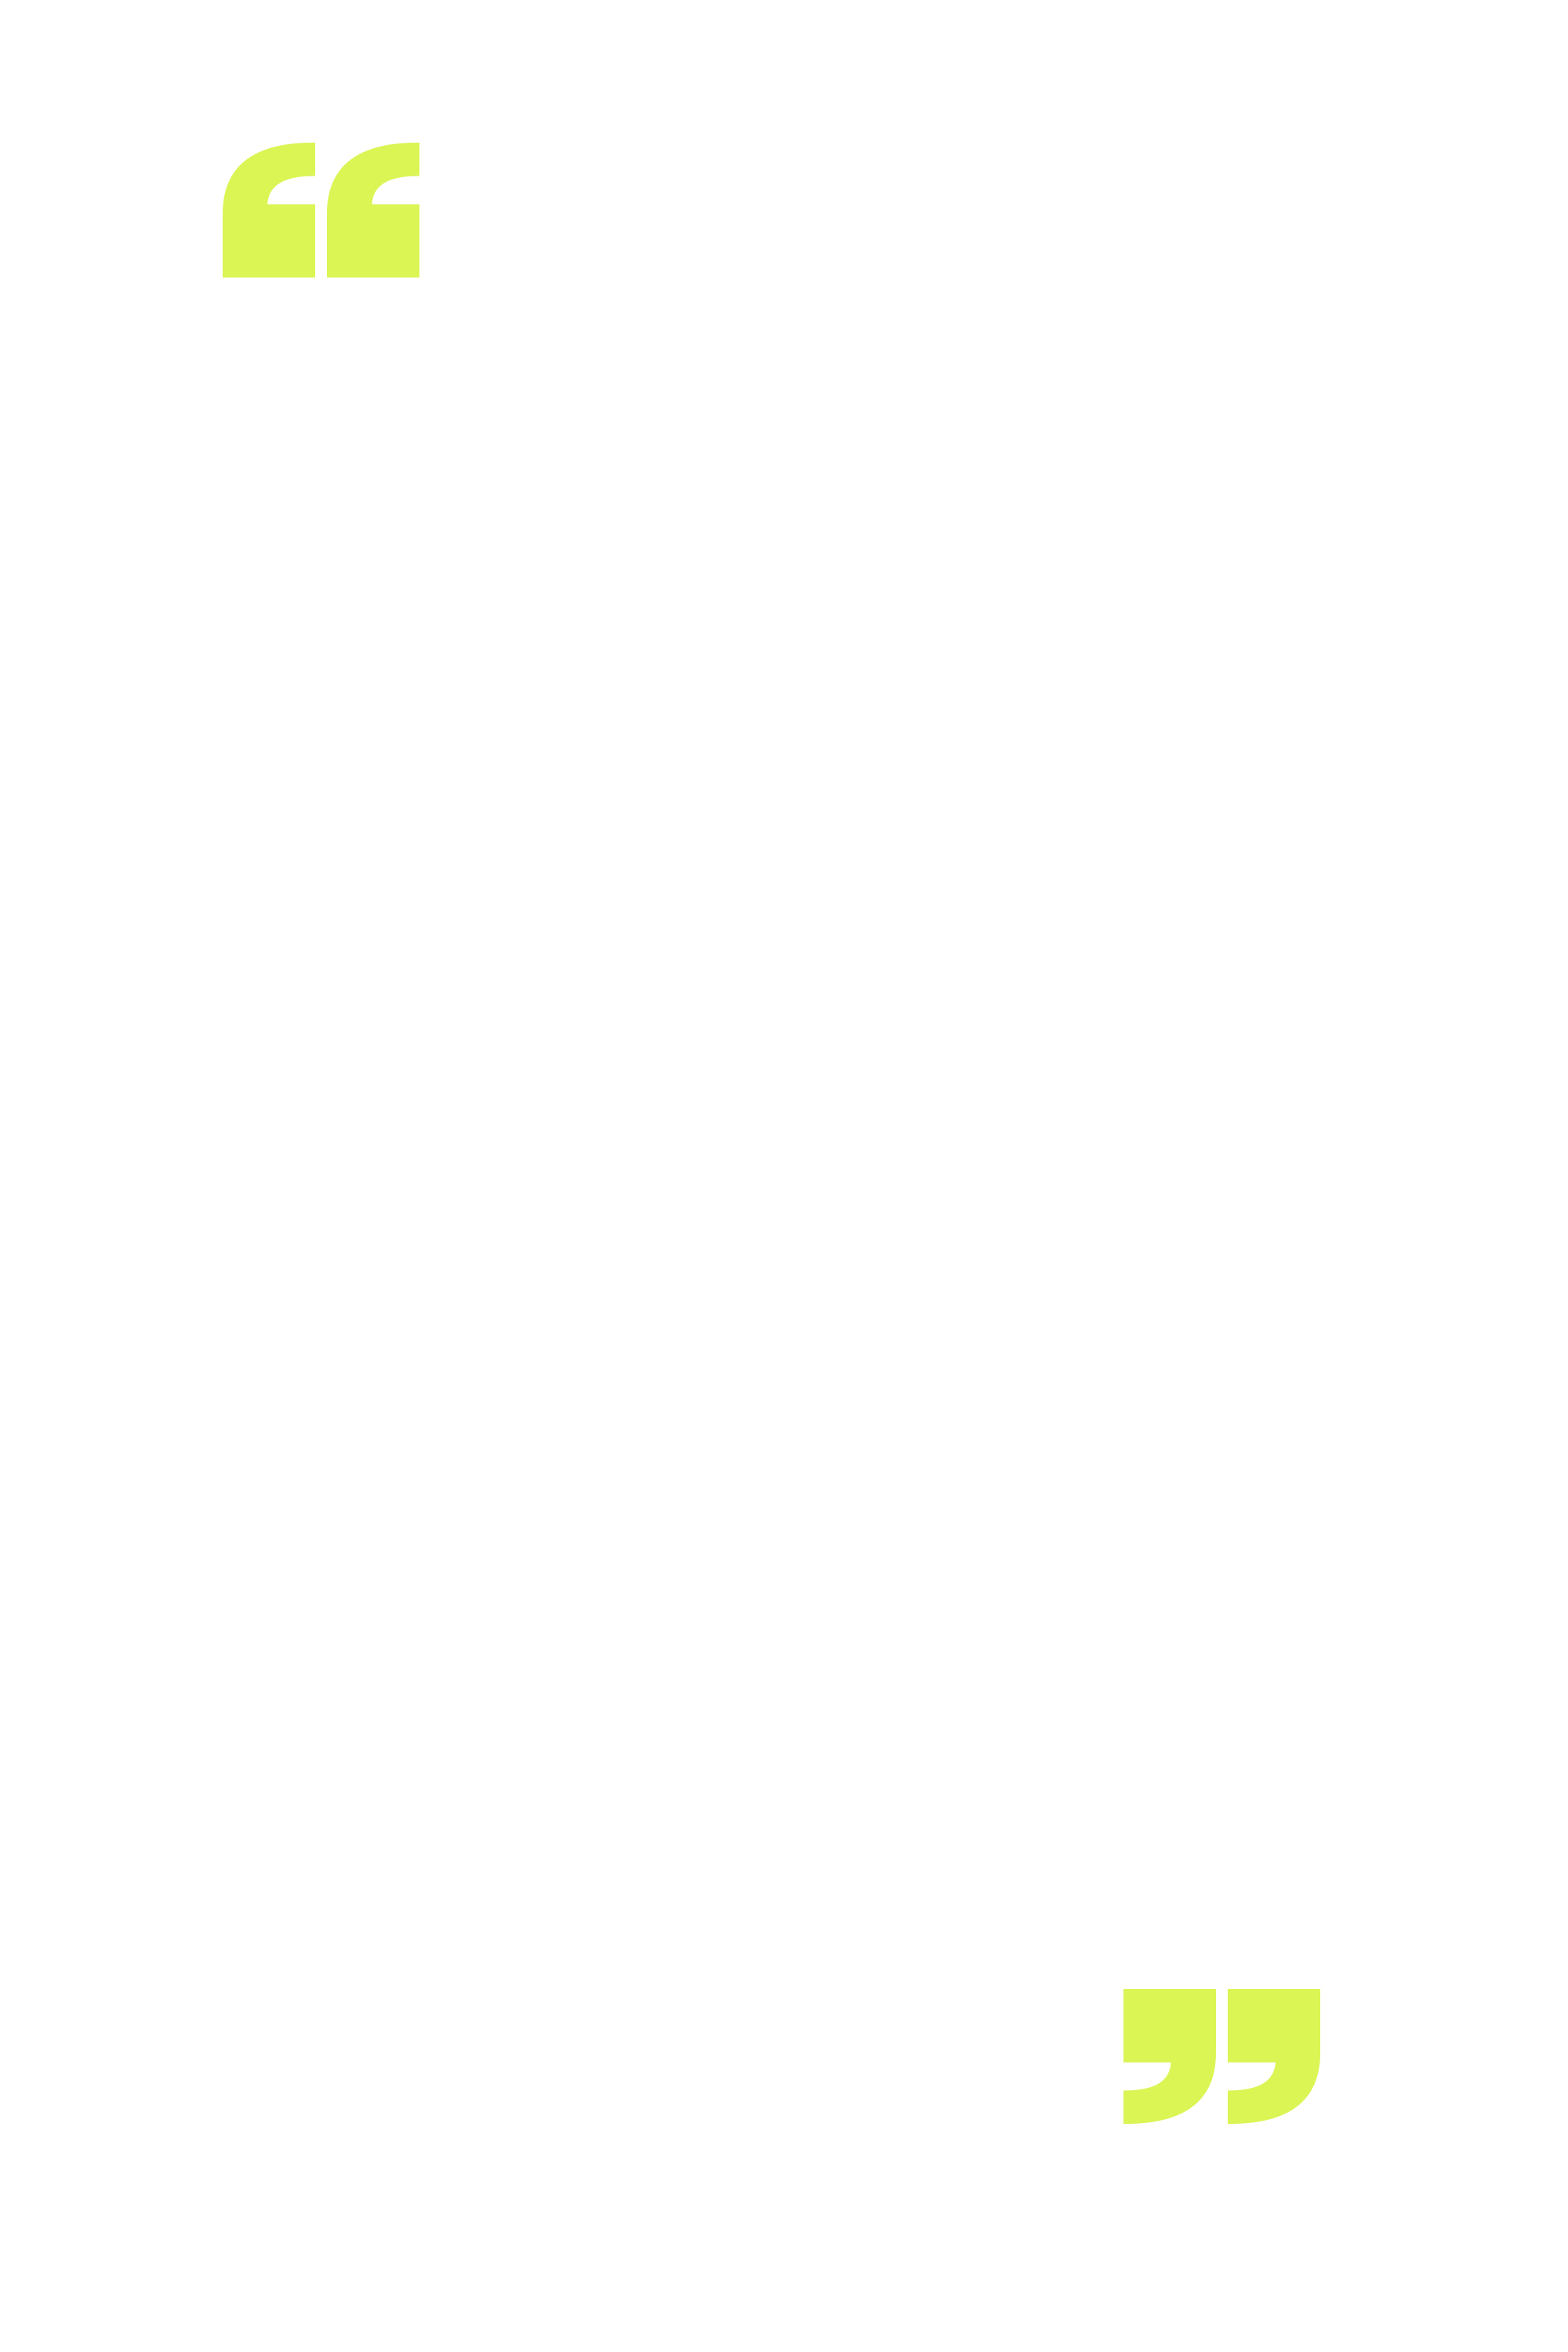 everything that I’ve put out and everything that I’ve said I wanted has come to life — little by little.